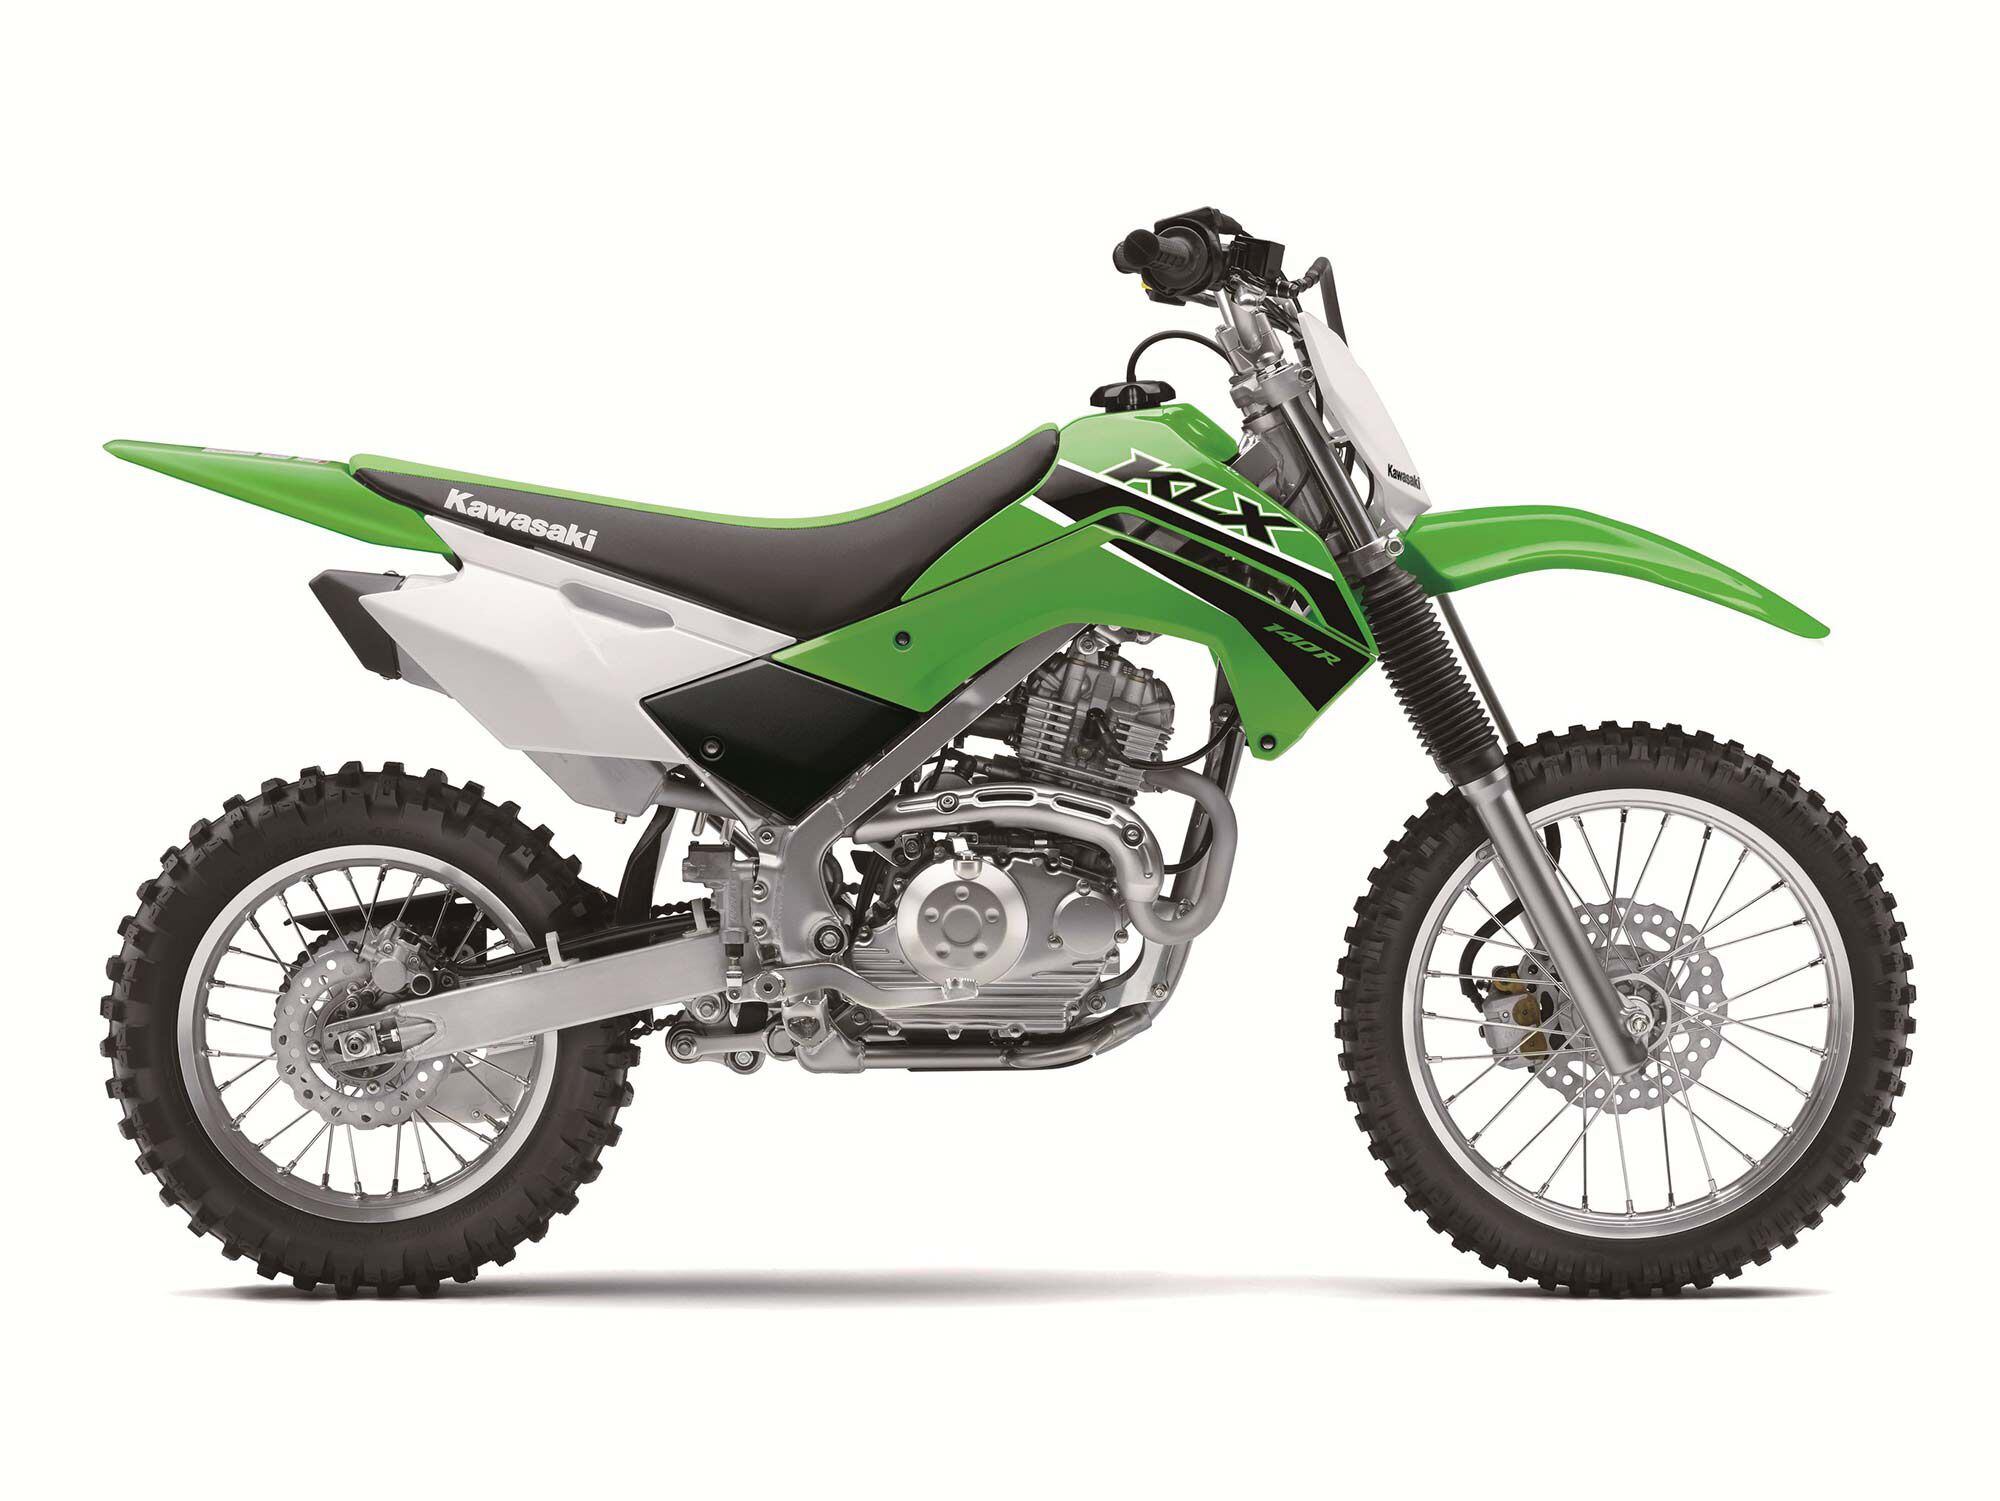 Looking to provide a ride for every youngster, the KLX140R arrives in three sizes including the standard KLX140R, KLX140R L, and KLX140R F.